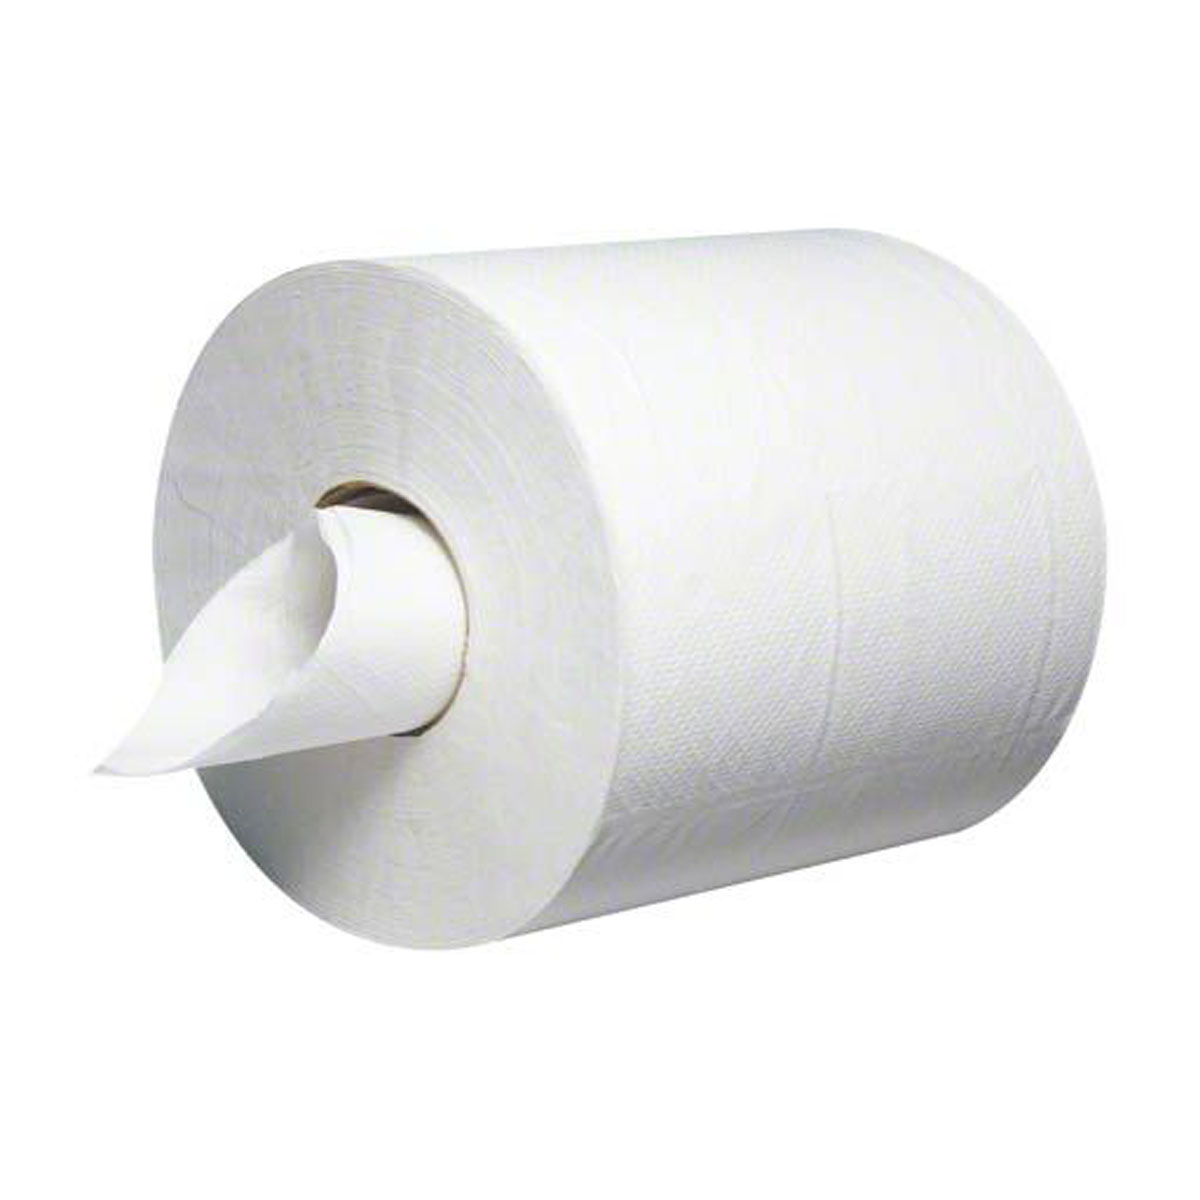 Standard Paper Towel Roll, White, 8 x 800 – Medical Products Supplies